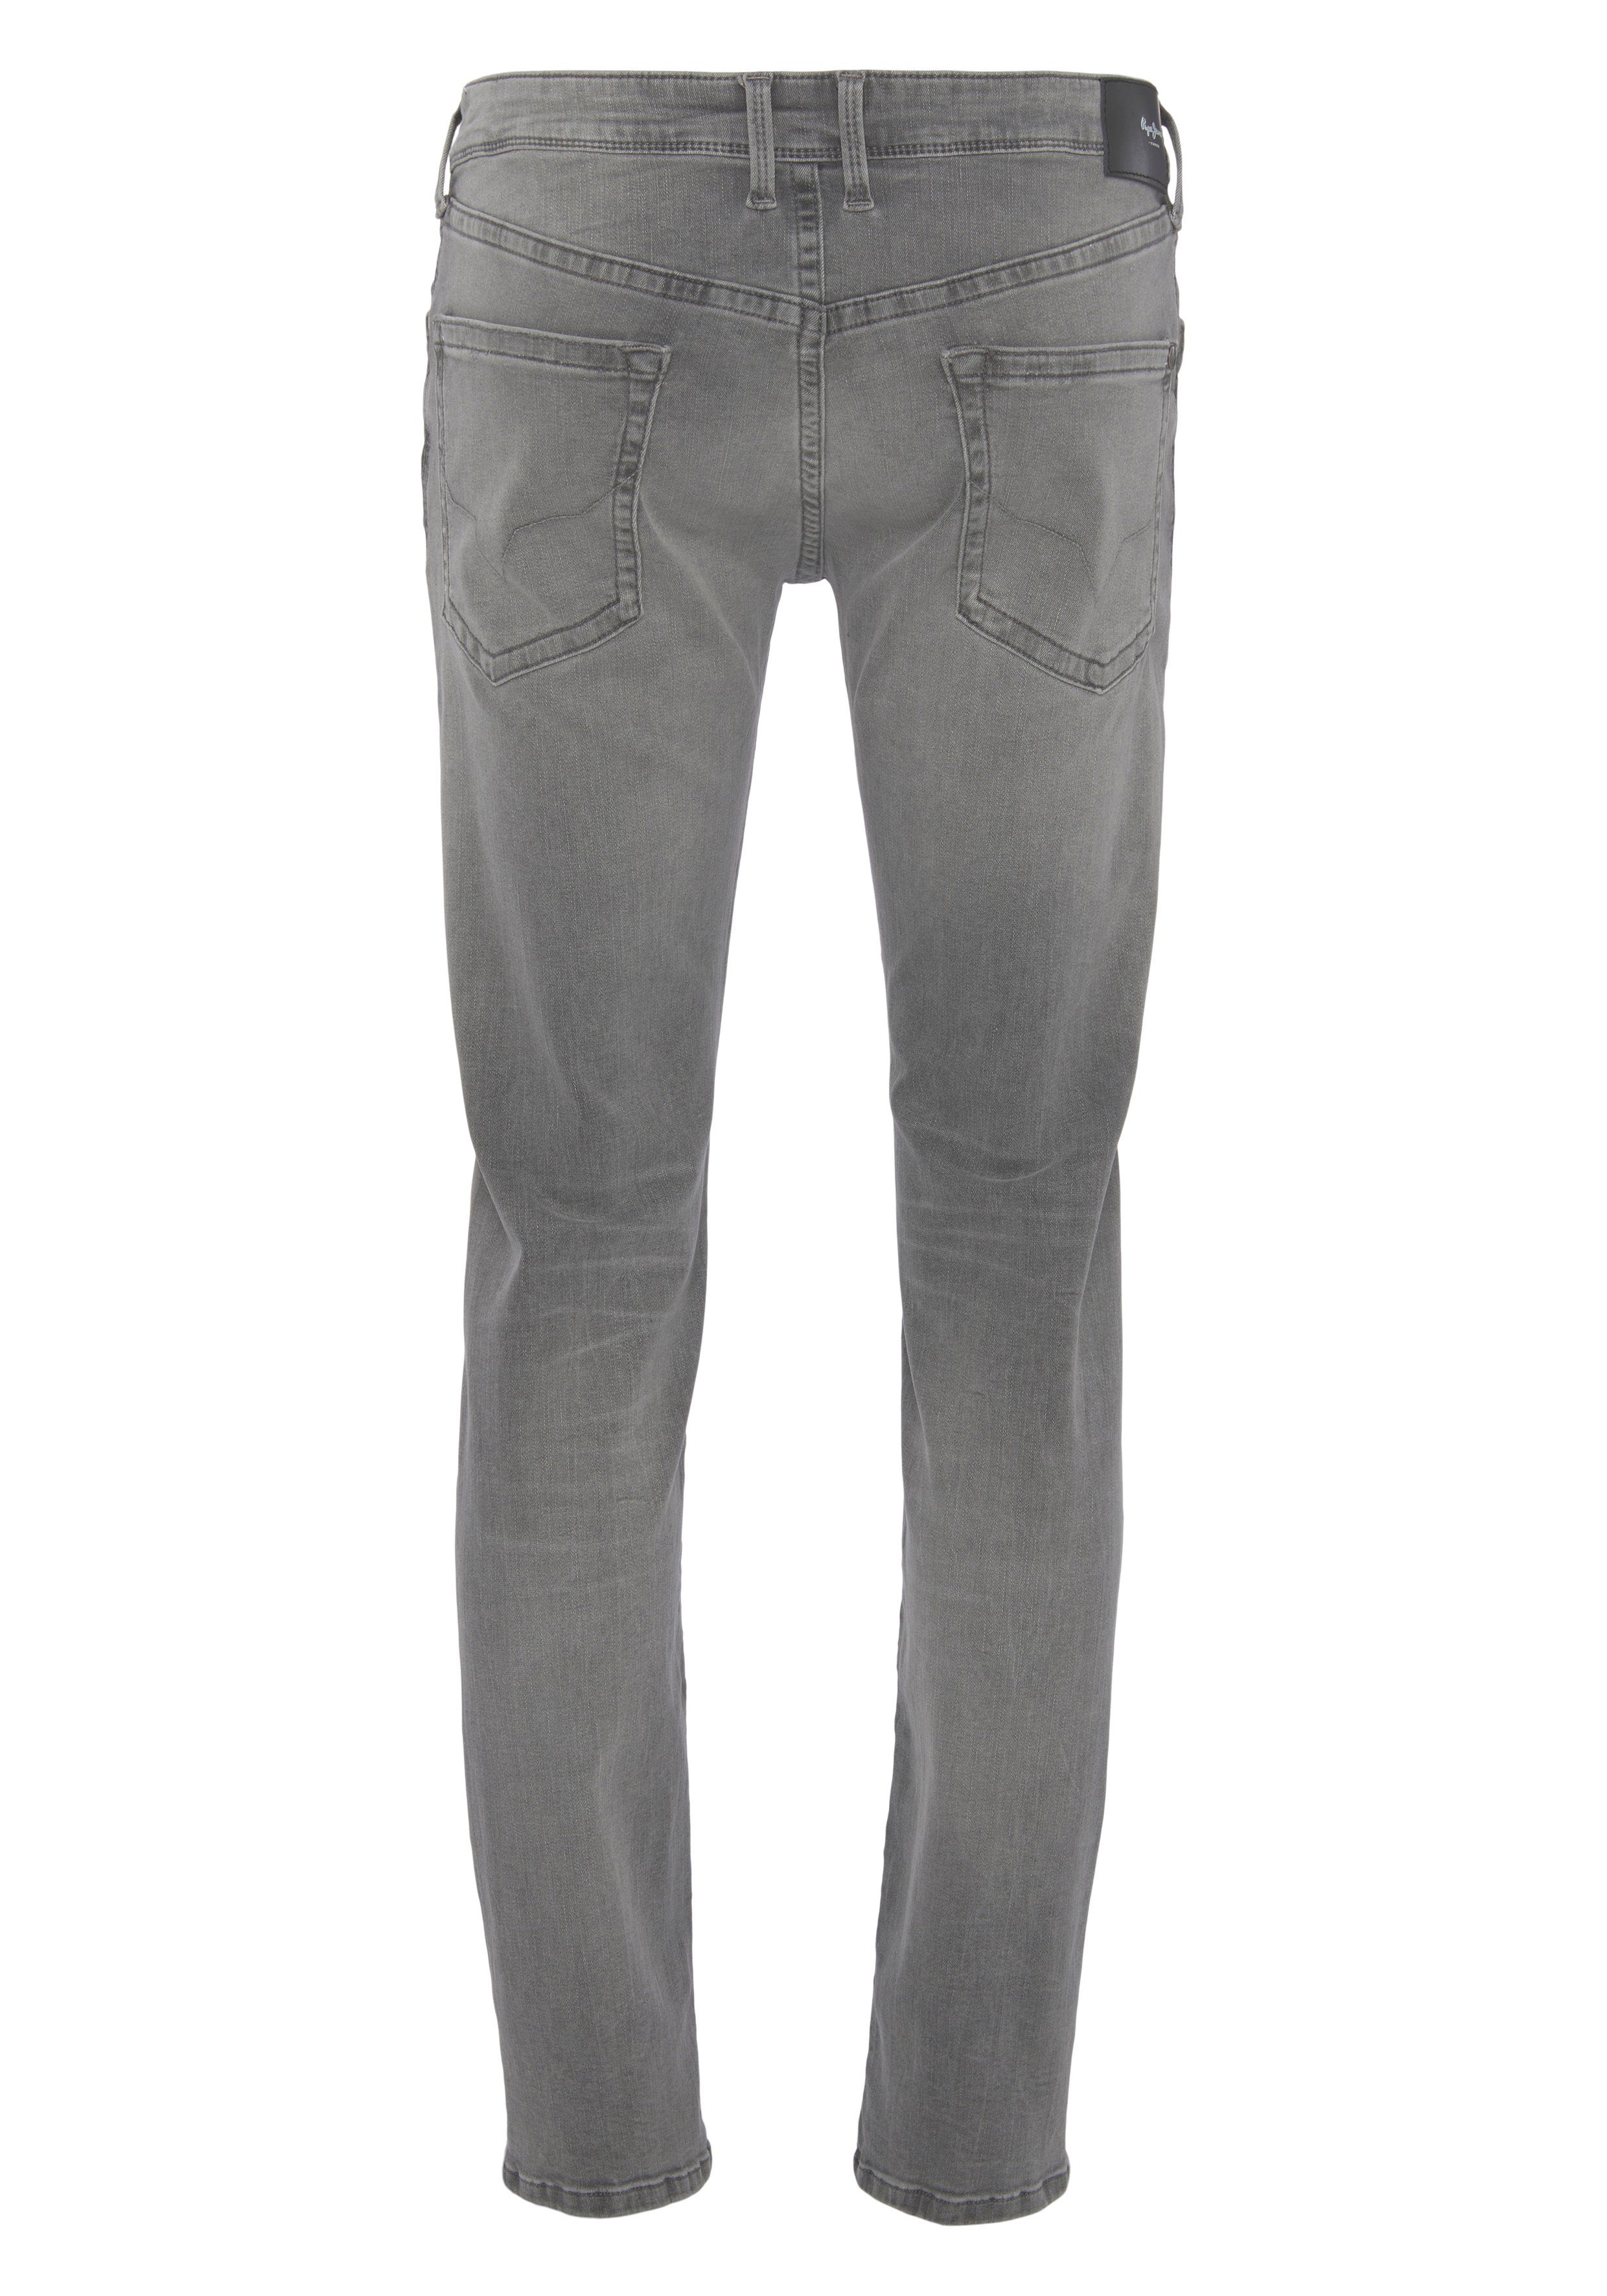 Jeans grey Pepe used Slim-fit-Jeans Hatch